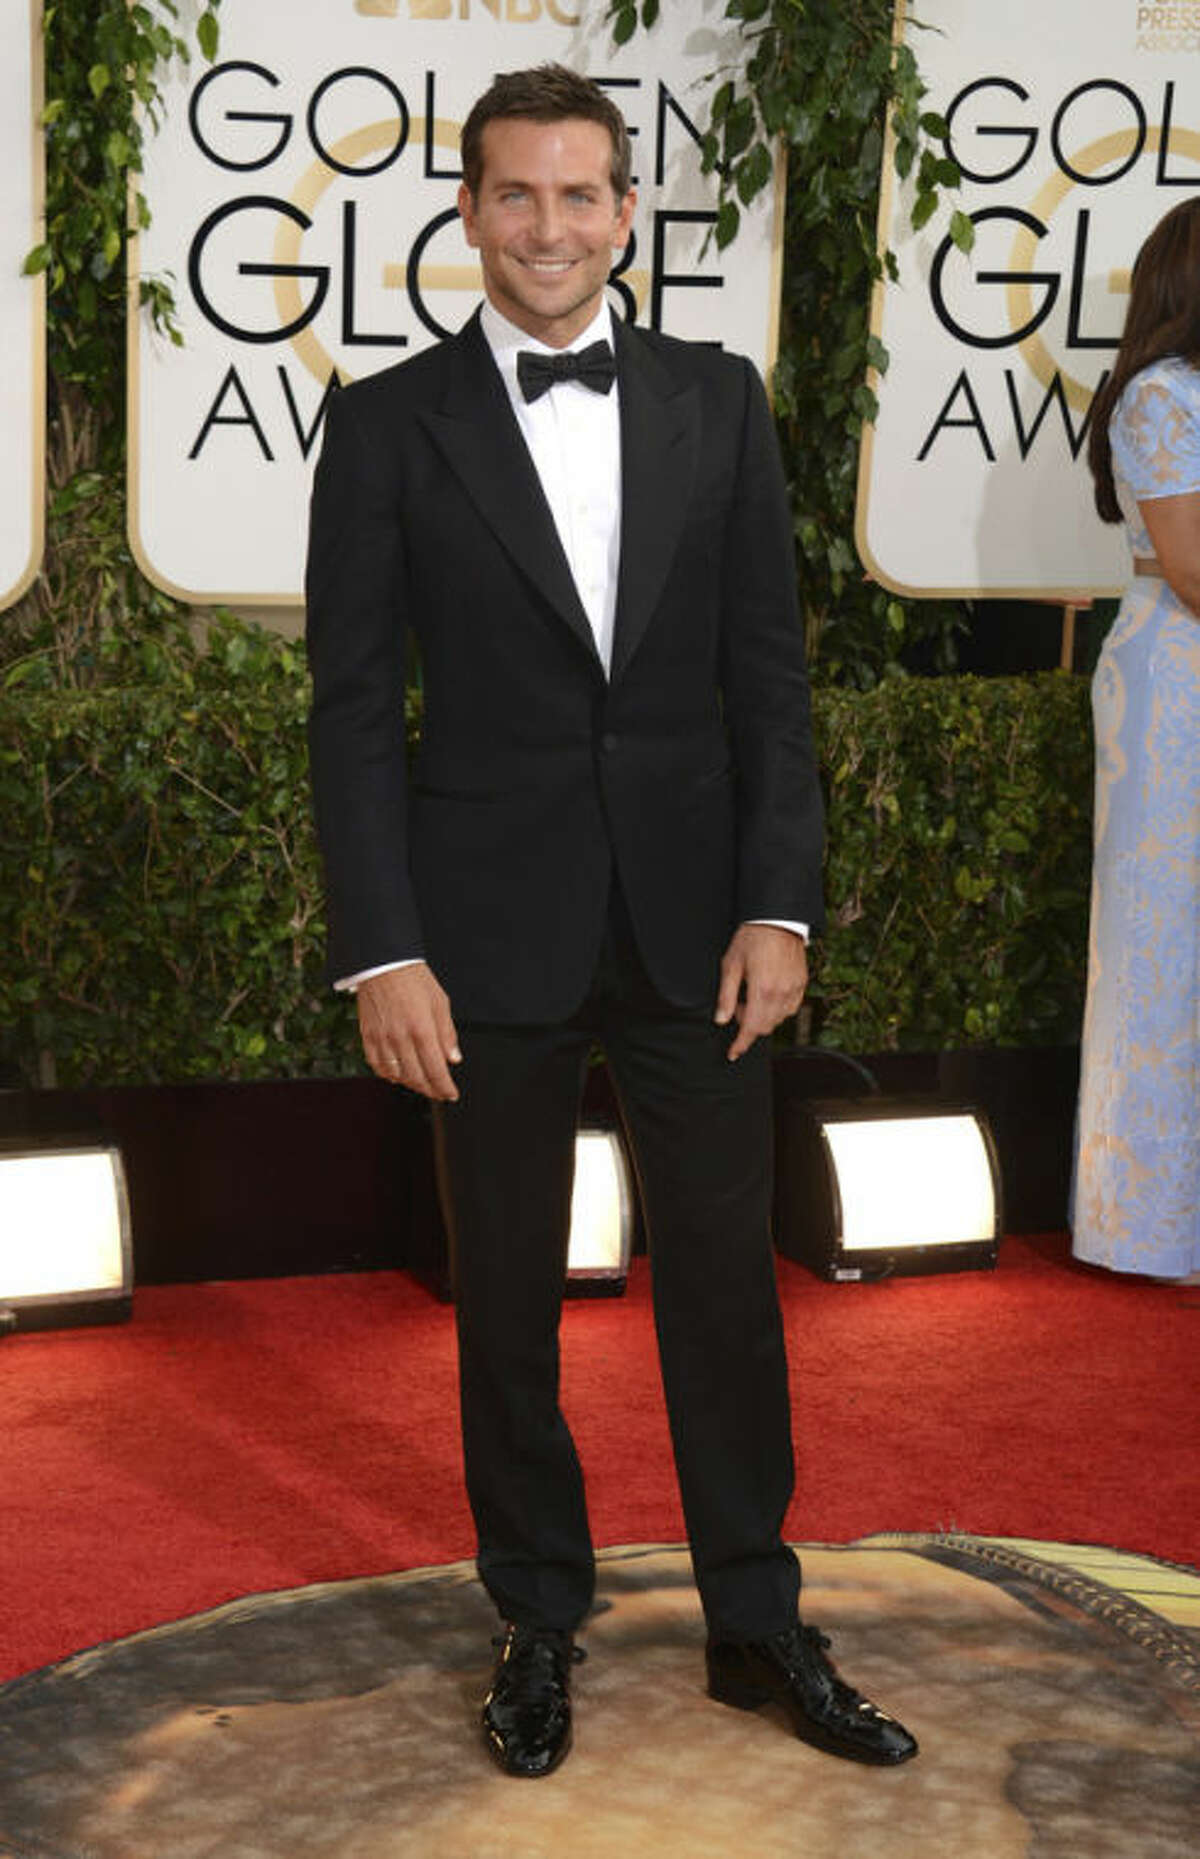 Bradley Cooper arrives at the 71st annual Golden Globe Awards at the Beverly Hilton Hotel on Sunday, Jan. 12, 2014, in Beverly Hills, Calif. (Photo by Jordan Strauss/Invision/AP)